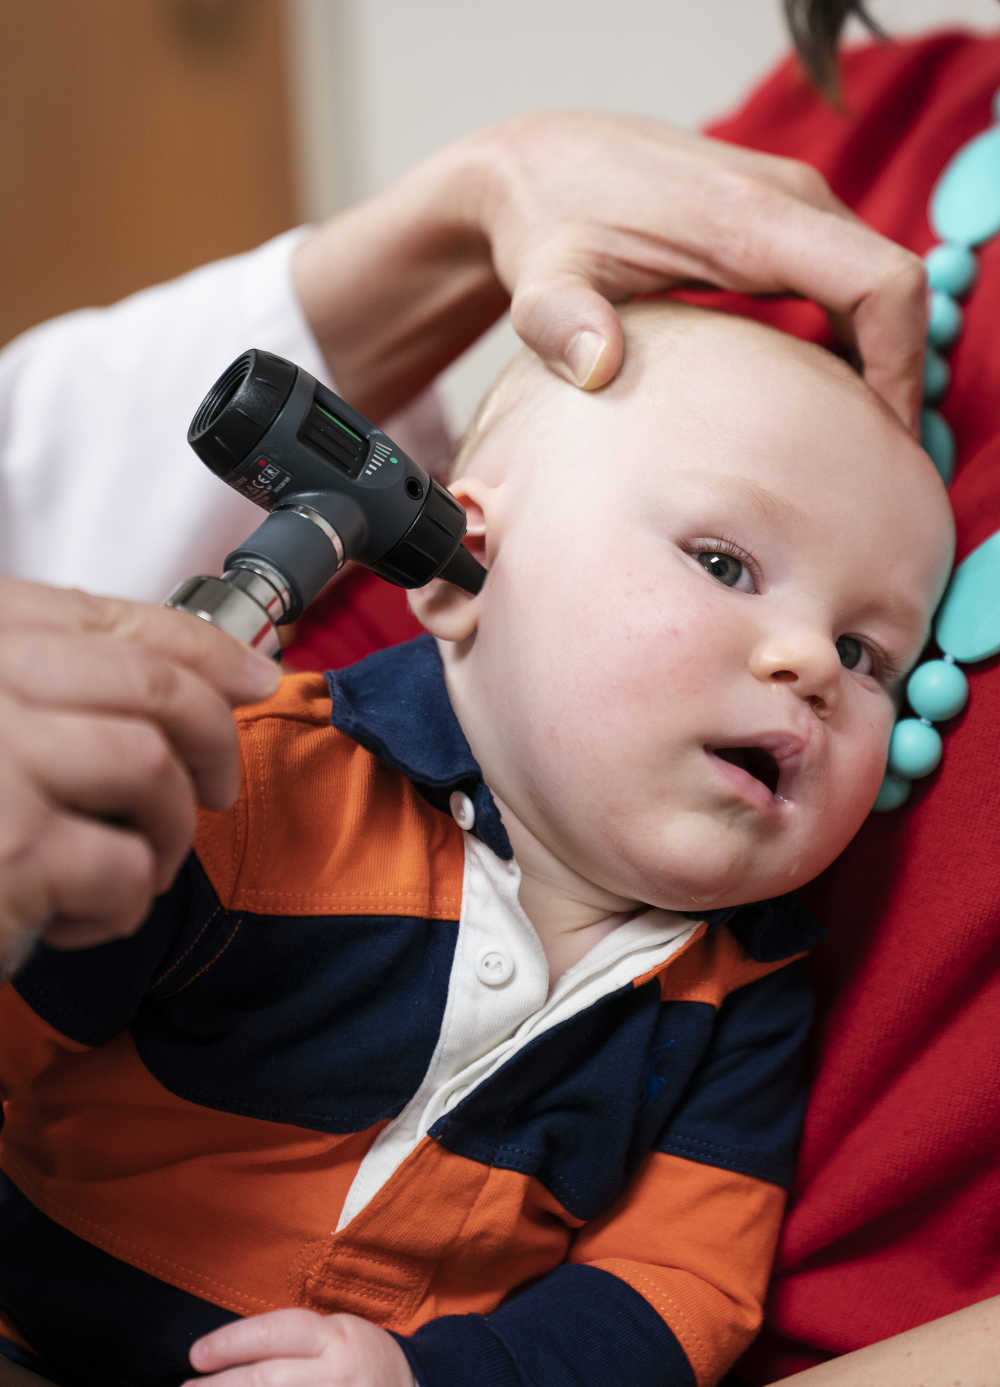 Ear, nose and throat issues are the number one concern prompting parents to see their child’s pediatrician. 